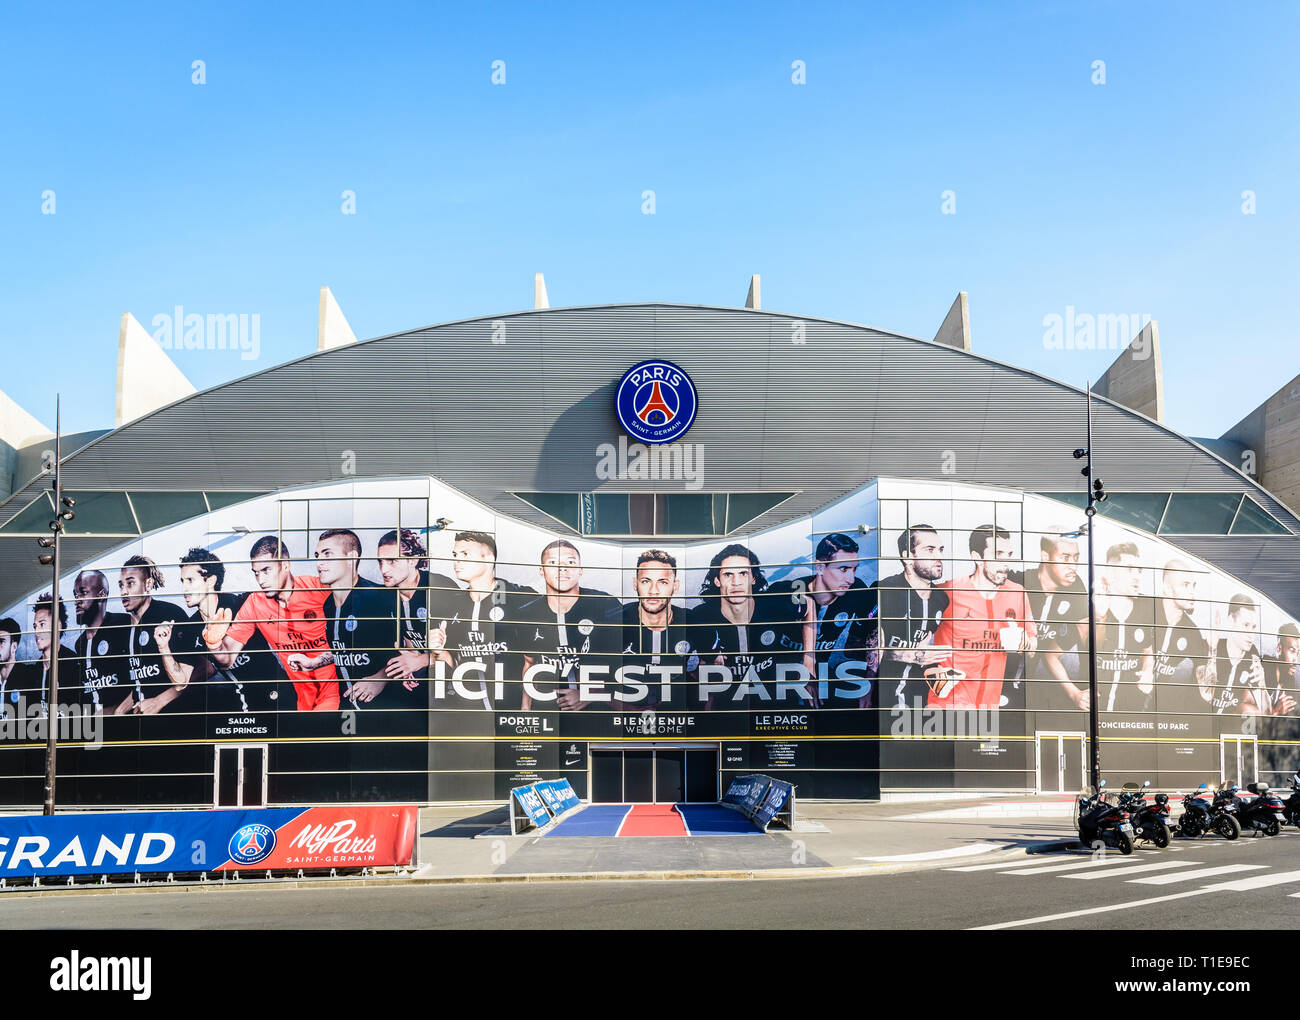 Main entrance of the Parc des Princes stadium in Paris, France, covered with a fresco of the players of the Paris Saint-Germain football club team. Stock Photo